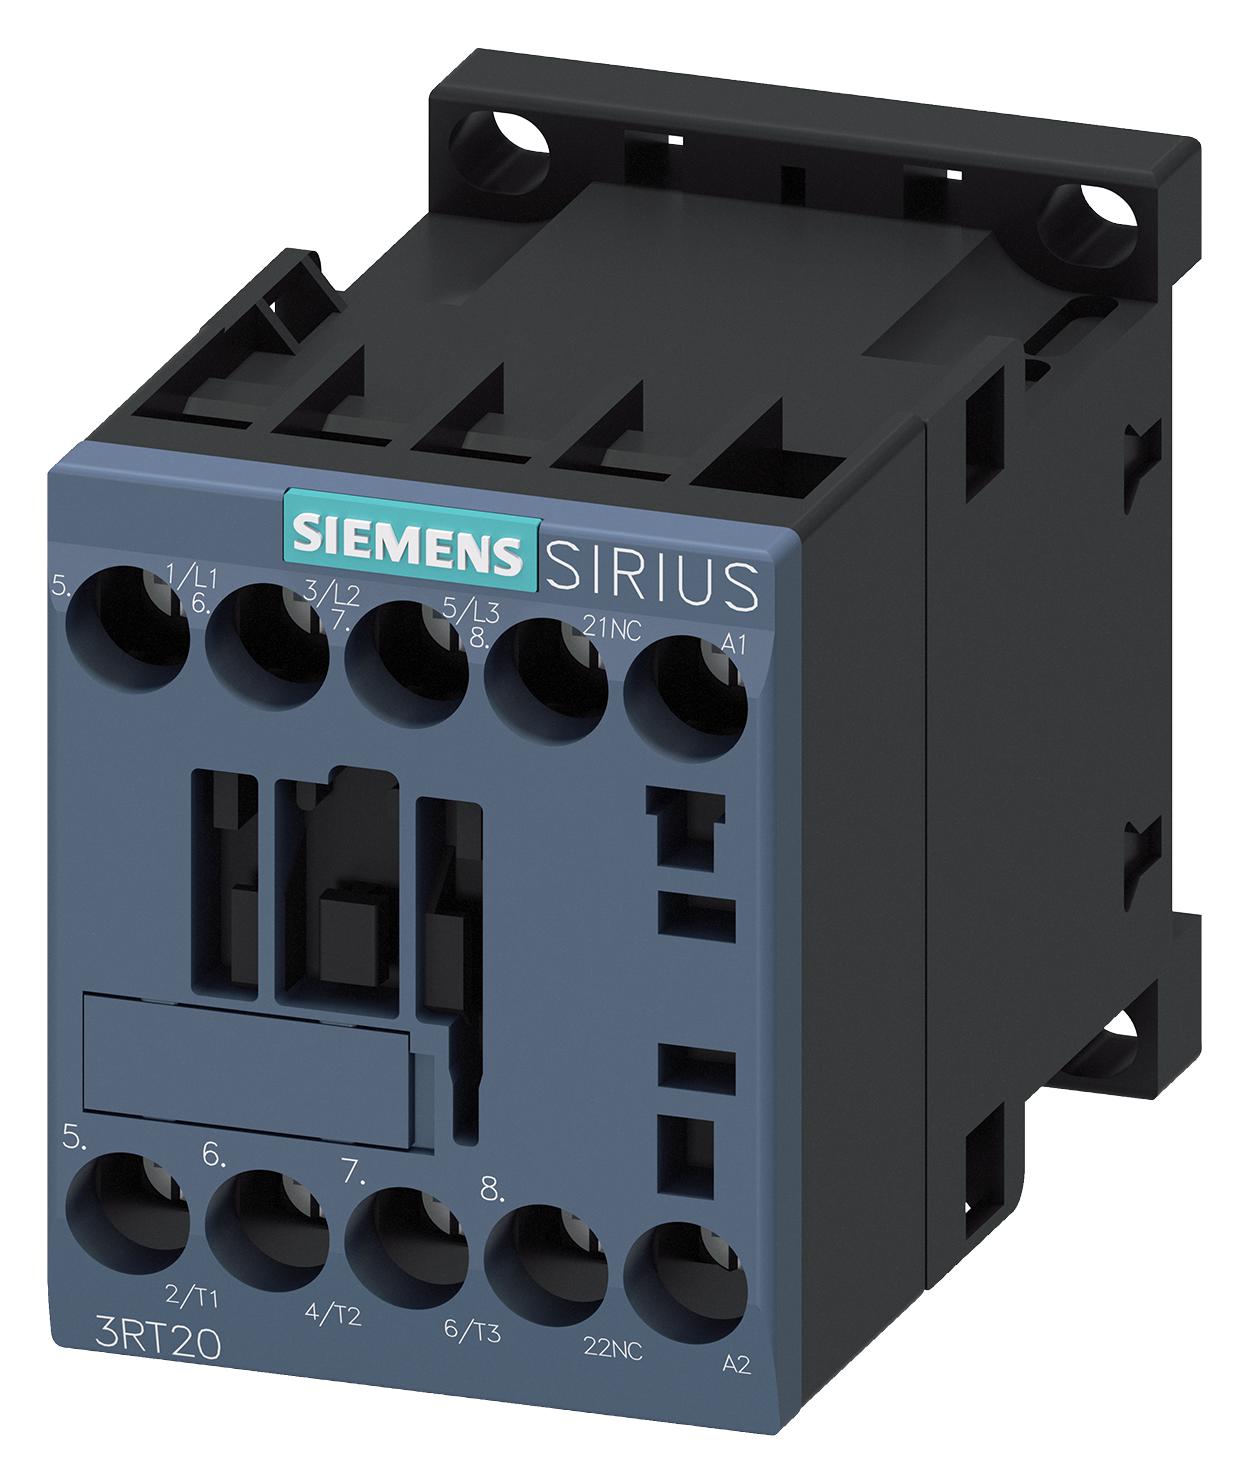 3RT2015-1AP02 CONTACTOR, 3PST-NO, 230V, PANEL/DINRAIL SIEMENS